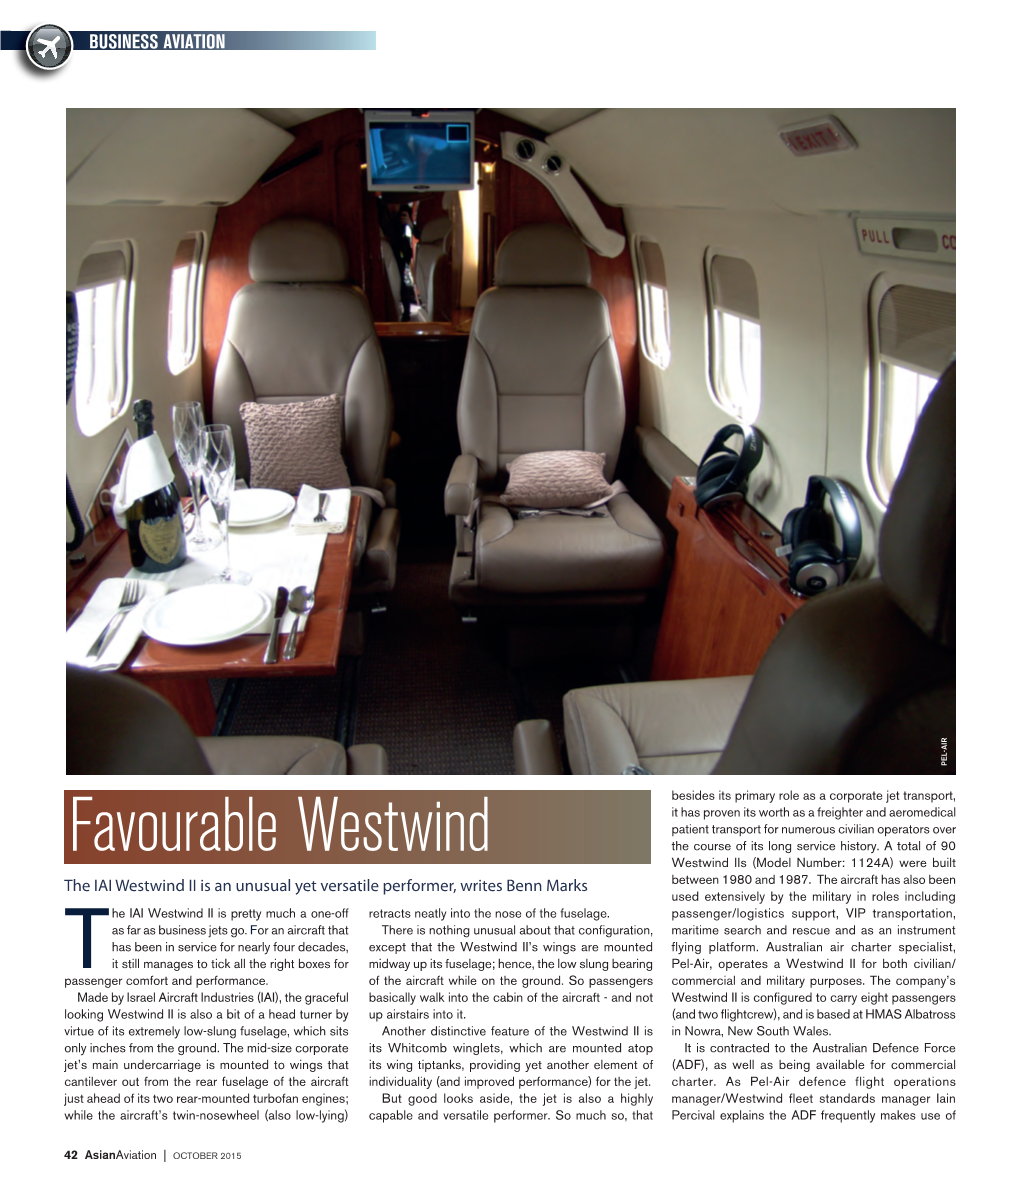 Favourable Westwind the Course of Its Long Service History